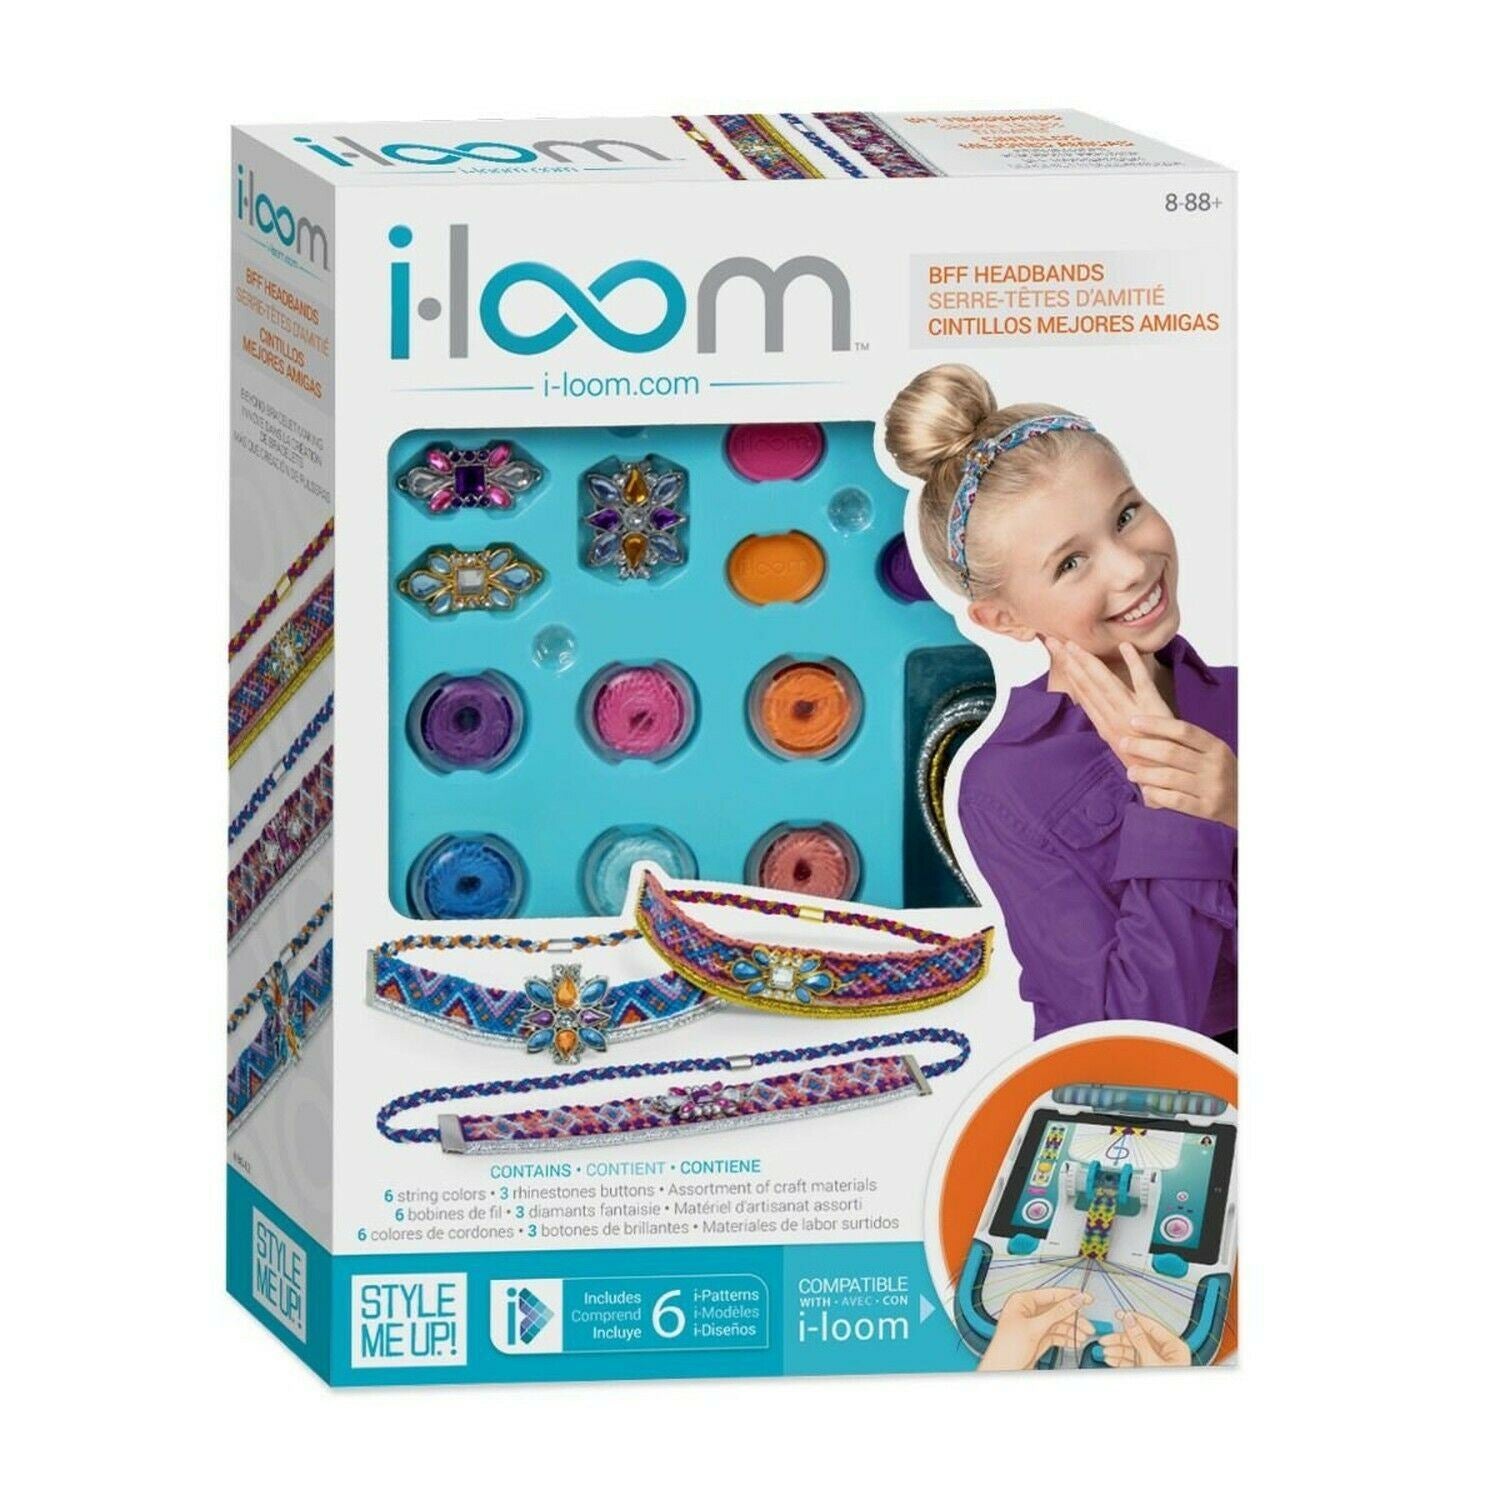 Style Me Up BFF HEADBANDS Craft Set for i-Loom - Includes 6 Patterns!